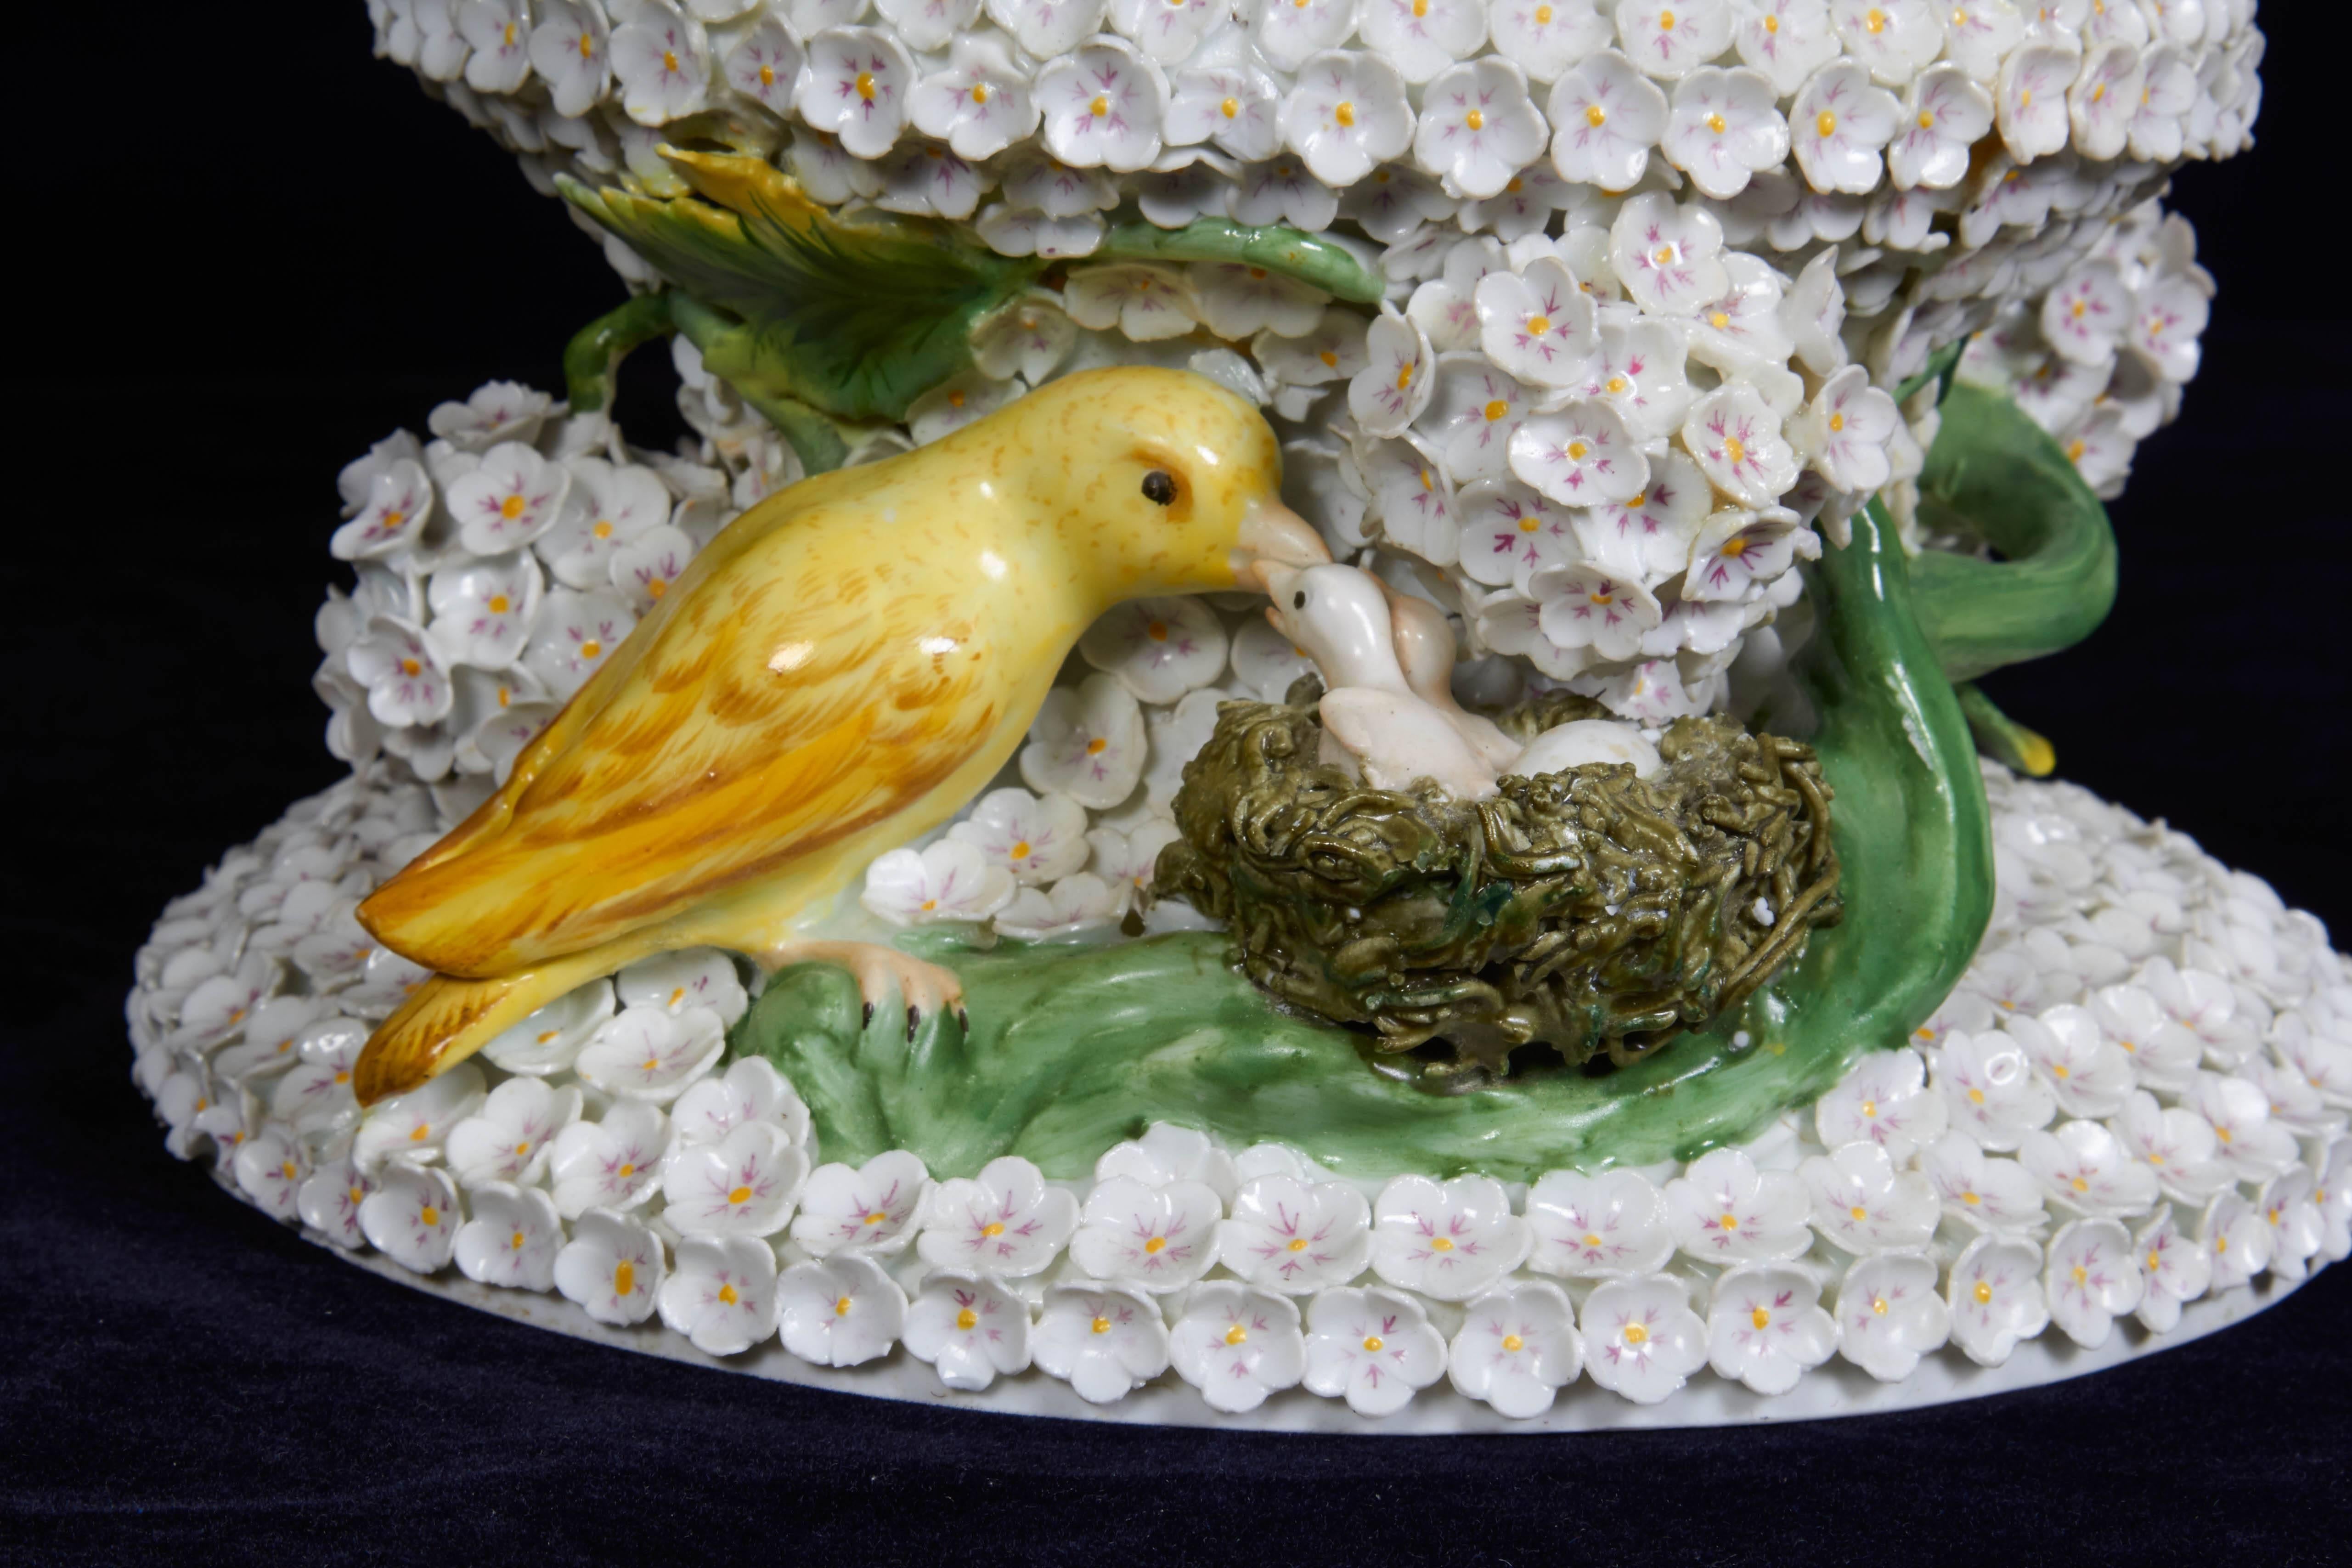 Early 19th Century Monumental Pair of Meissen Porcelain Snowball Vases with Parrots and Birds